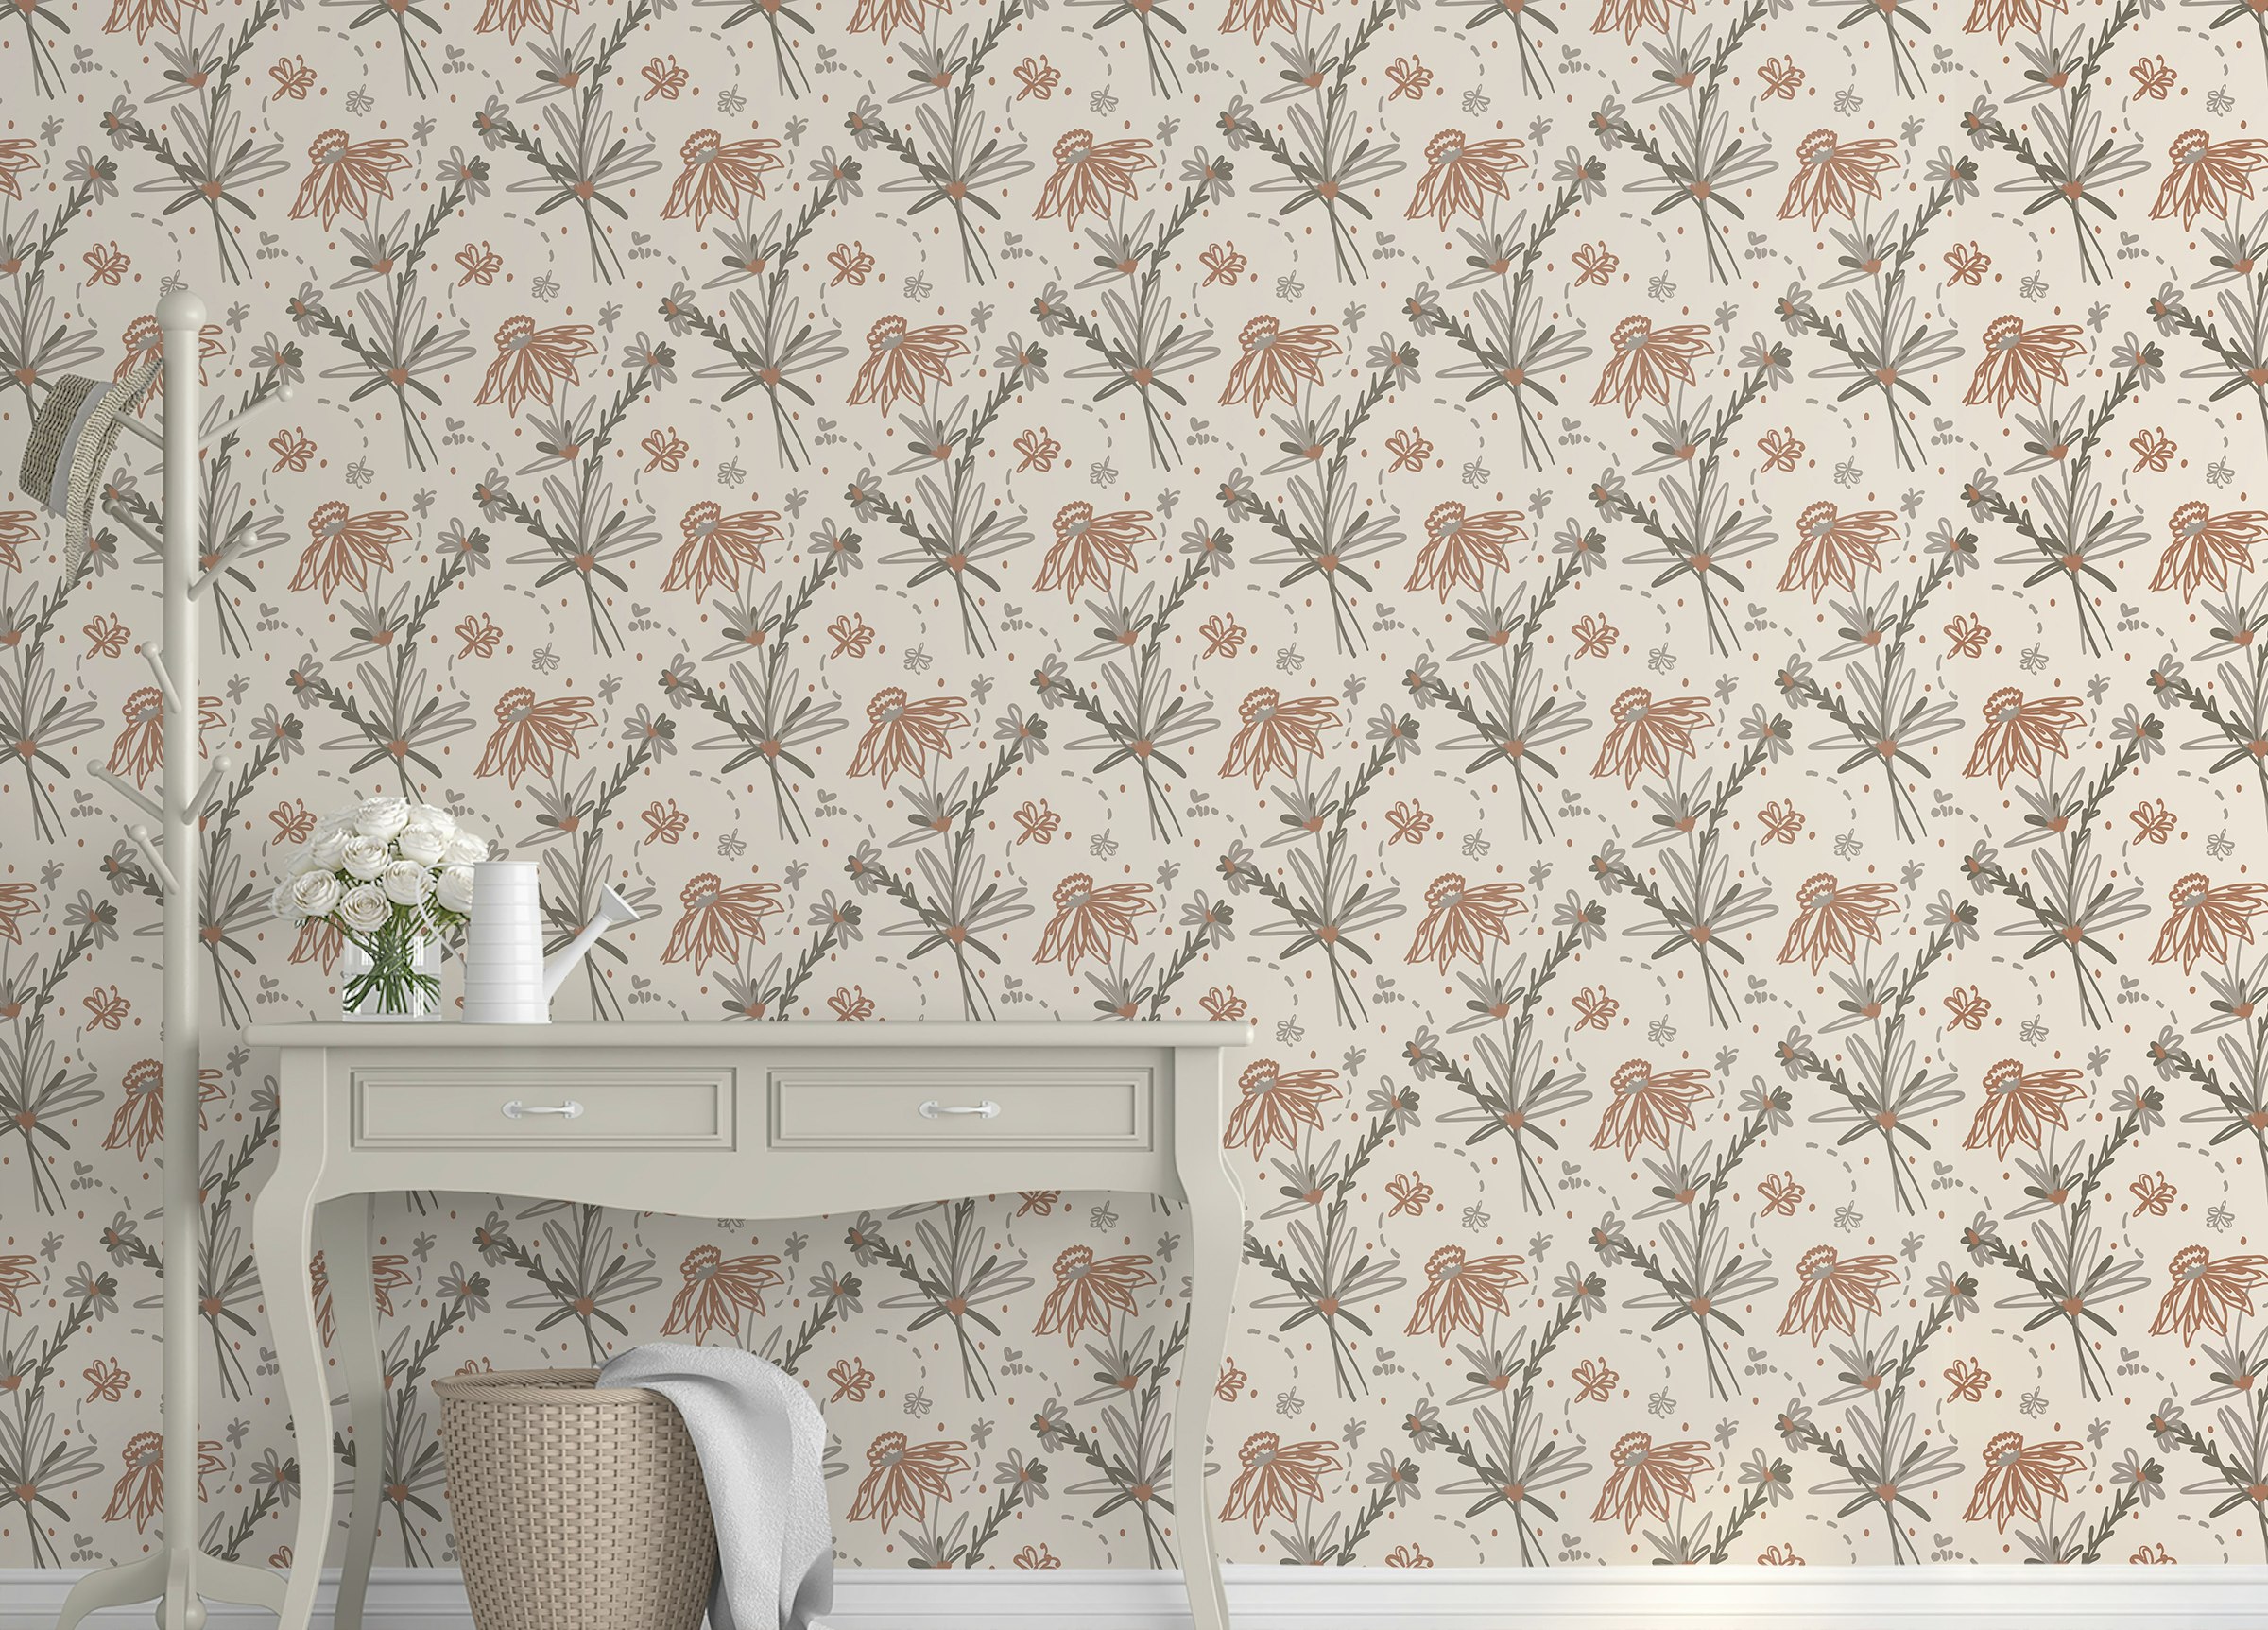 Custom made Earthy Tone Color Doodle Floral Repeat Pattern Boho Wallpaper